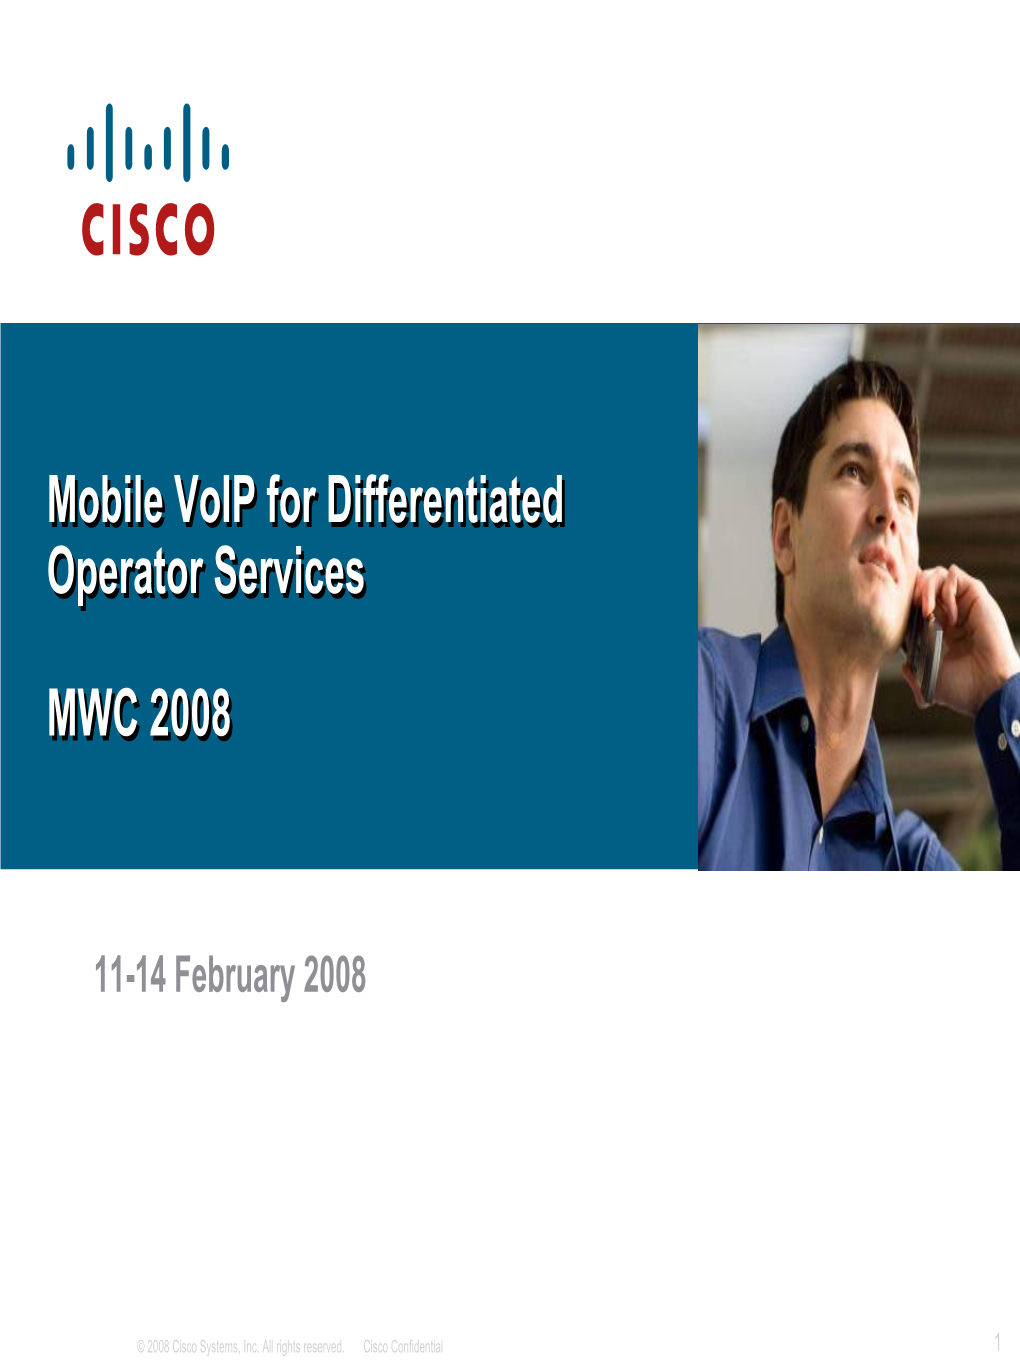 NO Dependency on Wifi and Hotspots the Highest Mobile Voip Voice Quality